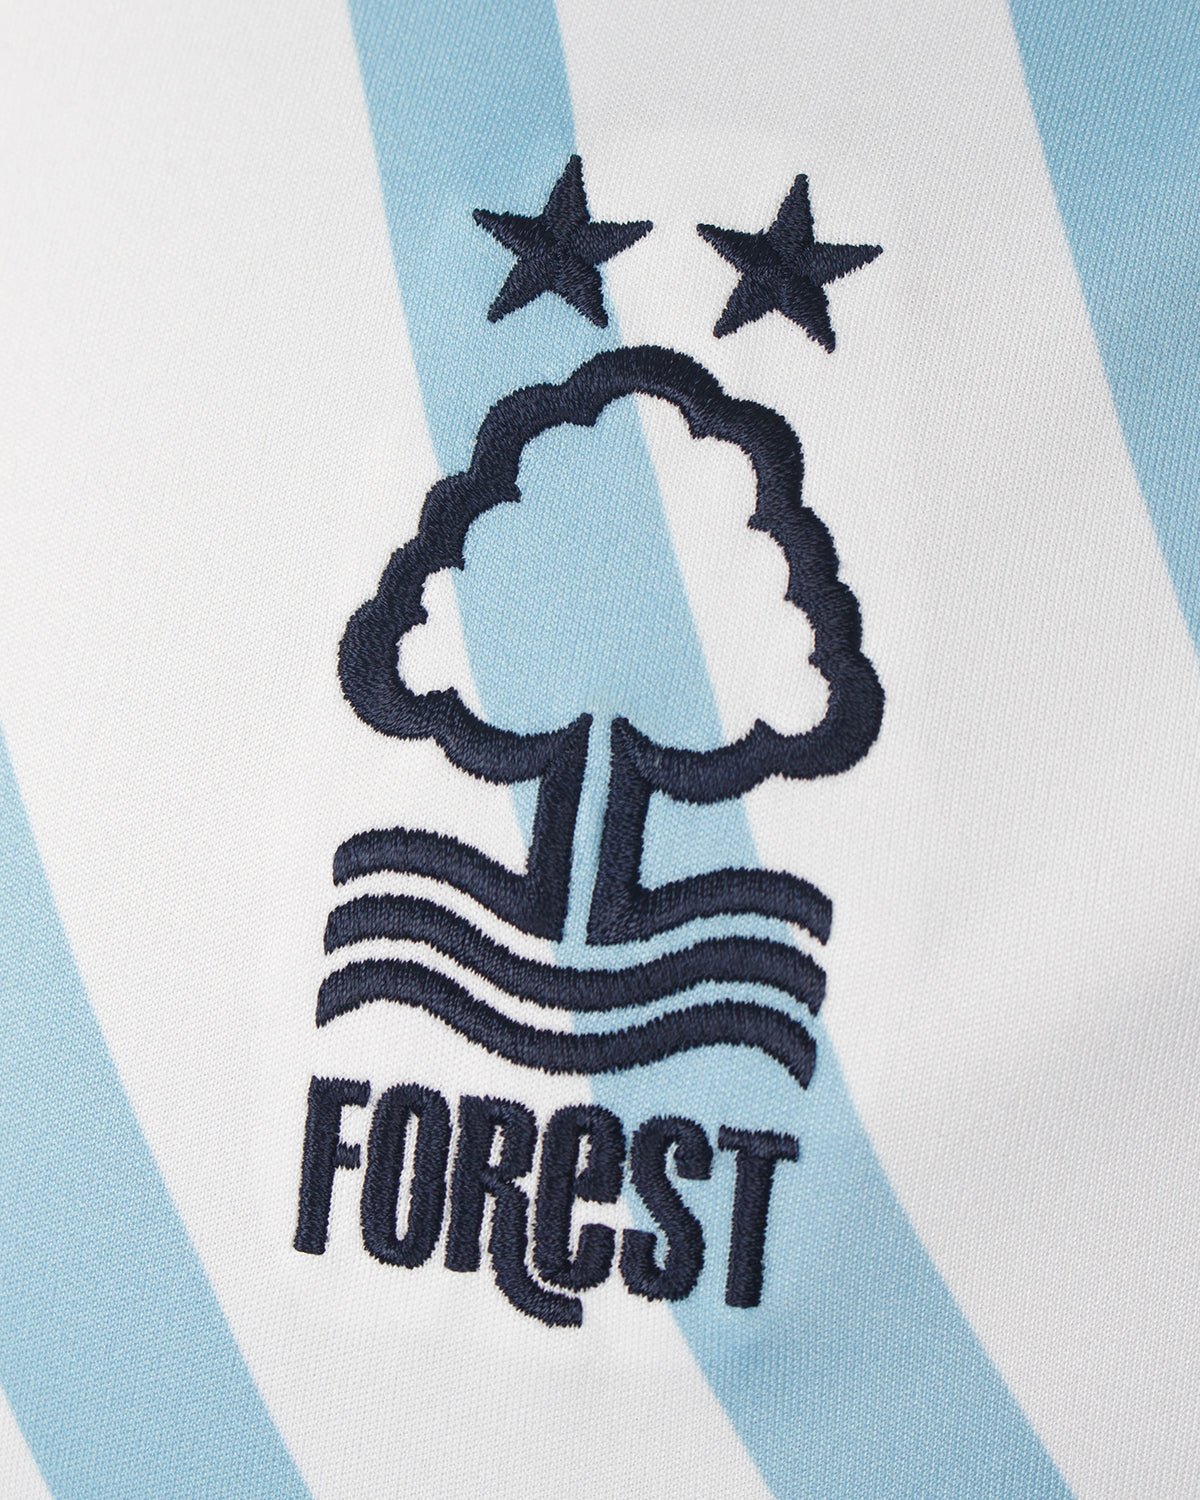 NFFC Away Shirt 23-24 - Boly 30 - Nottingham Forest FC